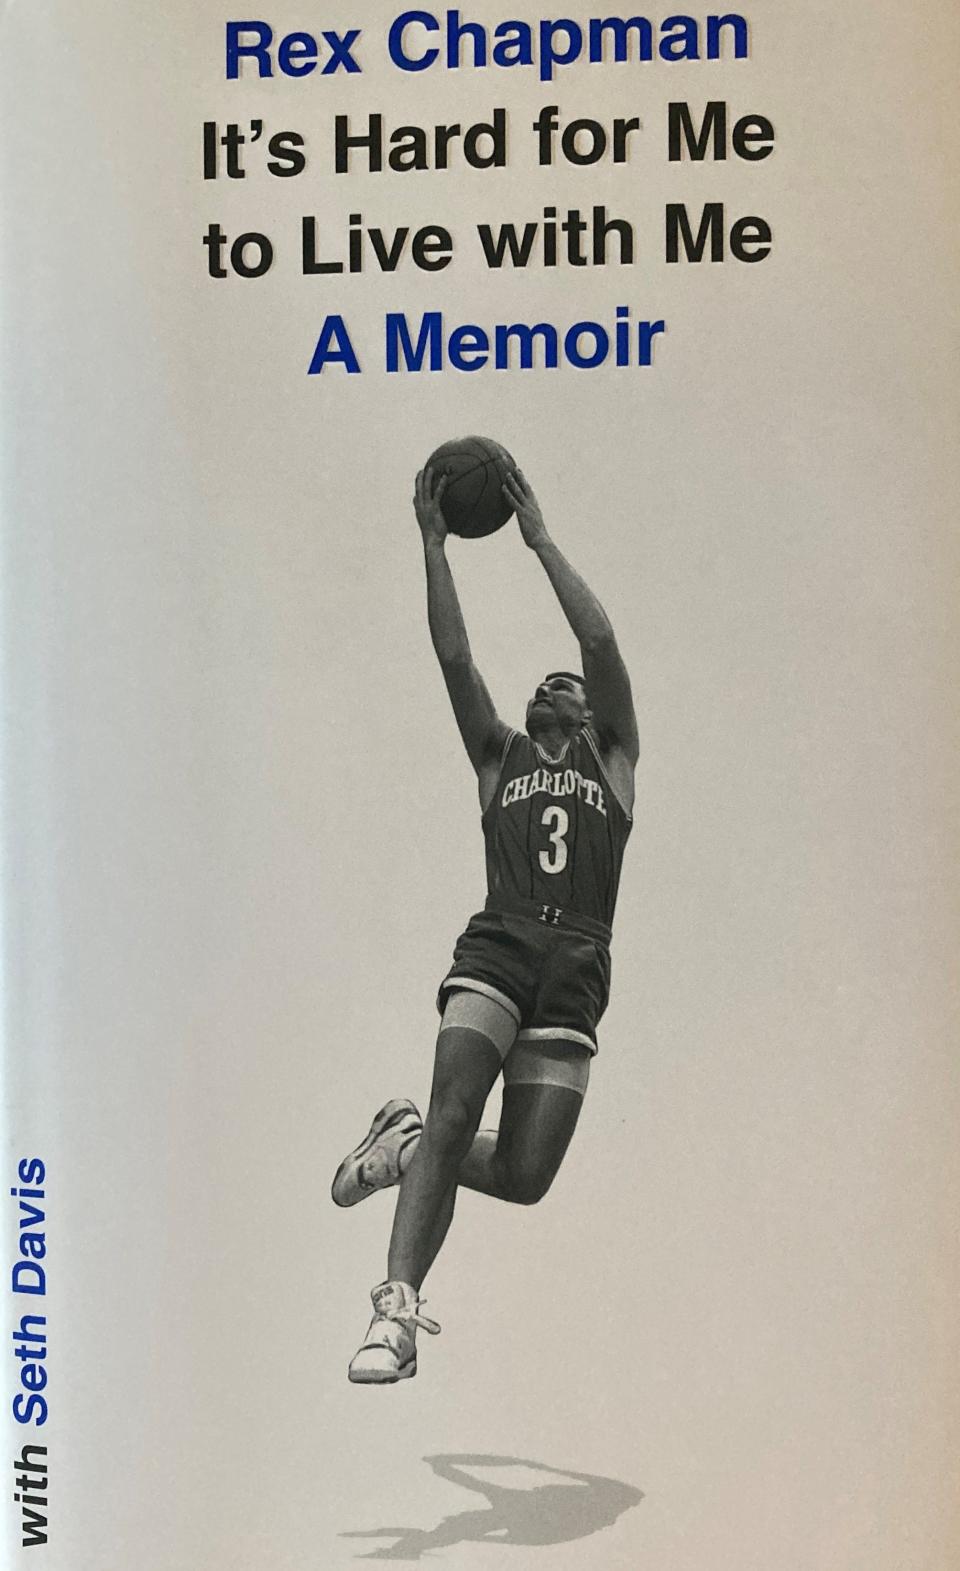 University of Kentucky basketball great Rex Chapman has detailed his rise, fall and recovery in life in a bestselling book.